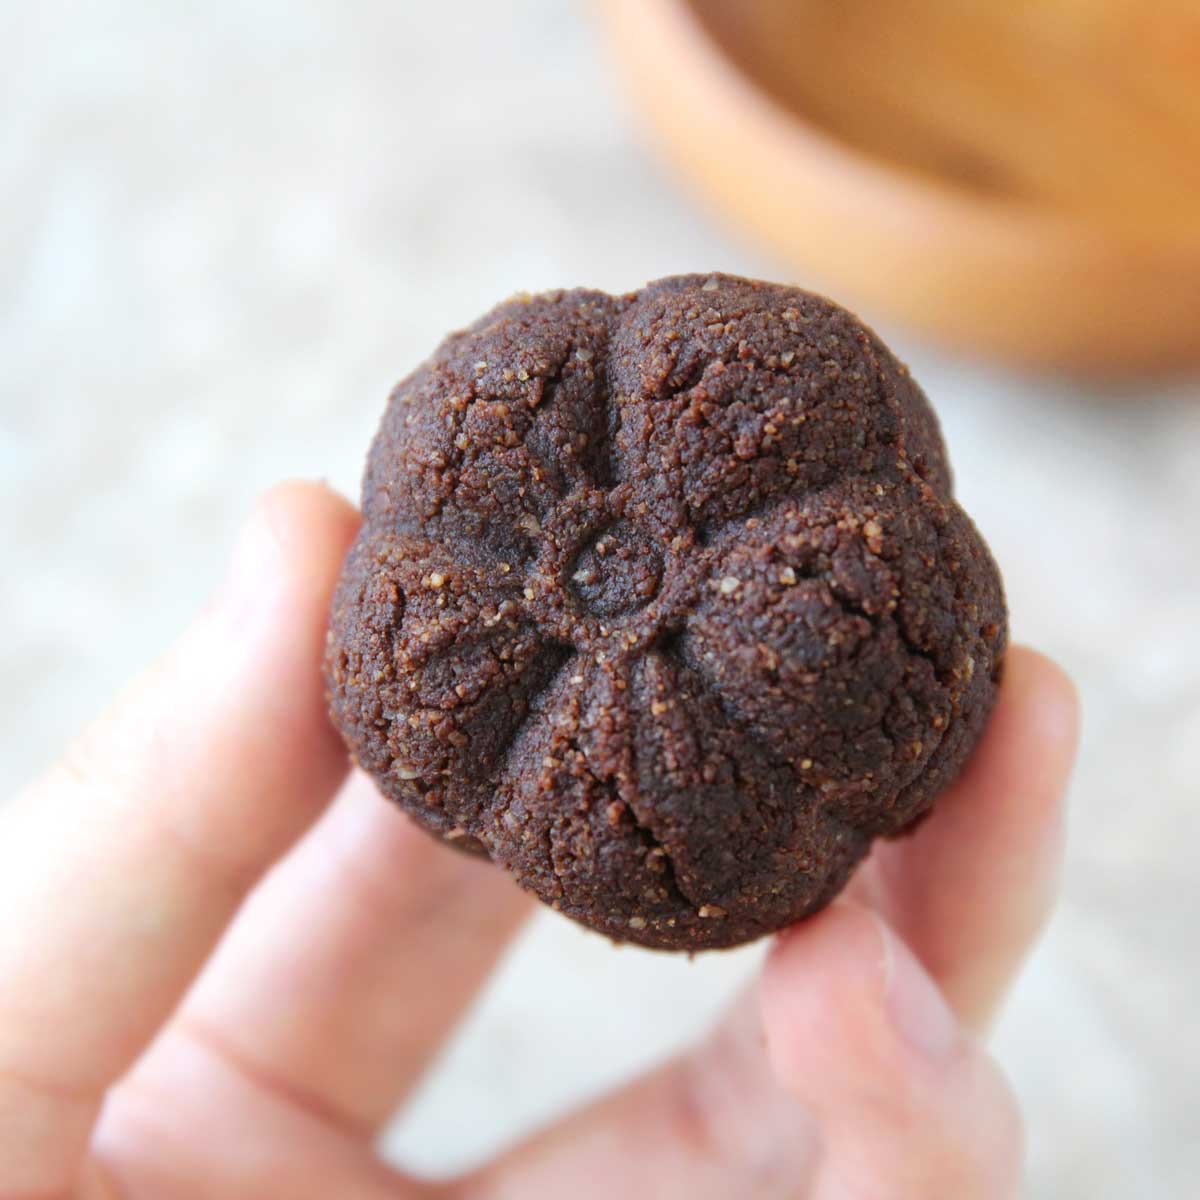 Chocolate Paleo Mooncakes Recipe (made with Pumpkin and Pecan Filling)